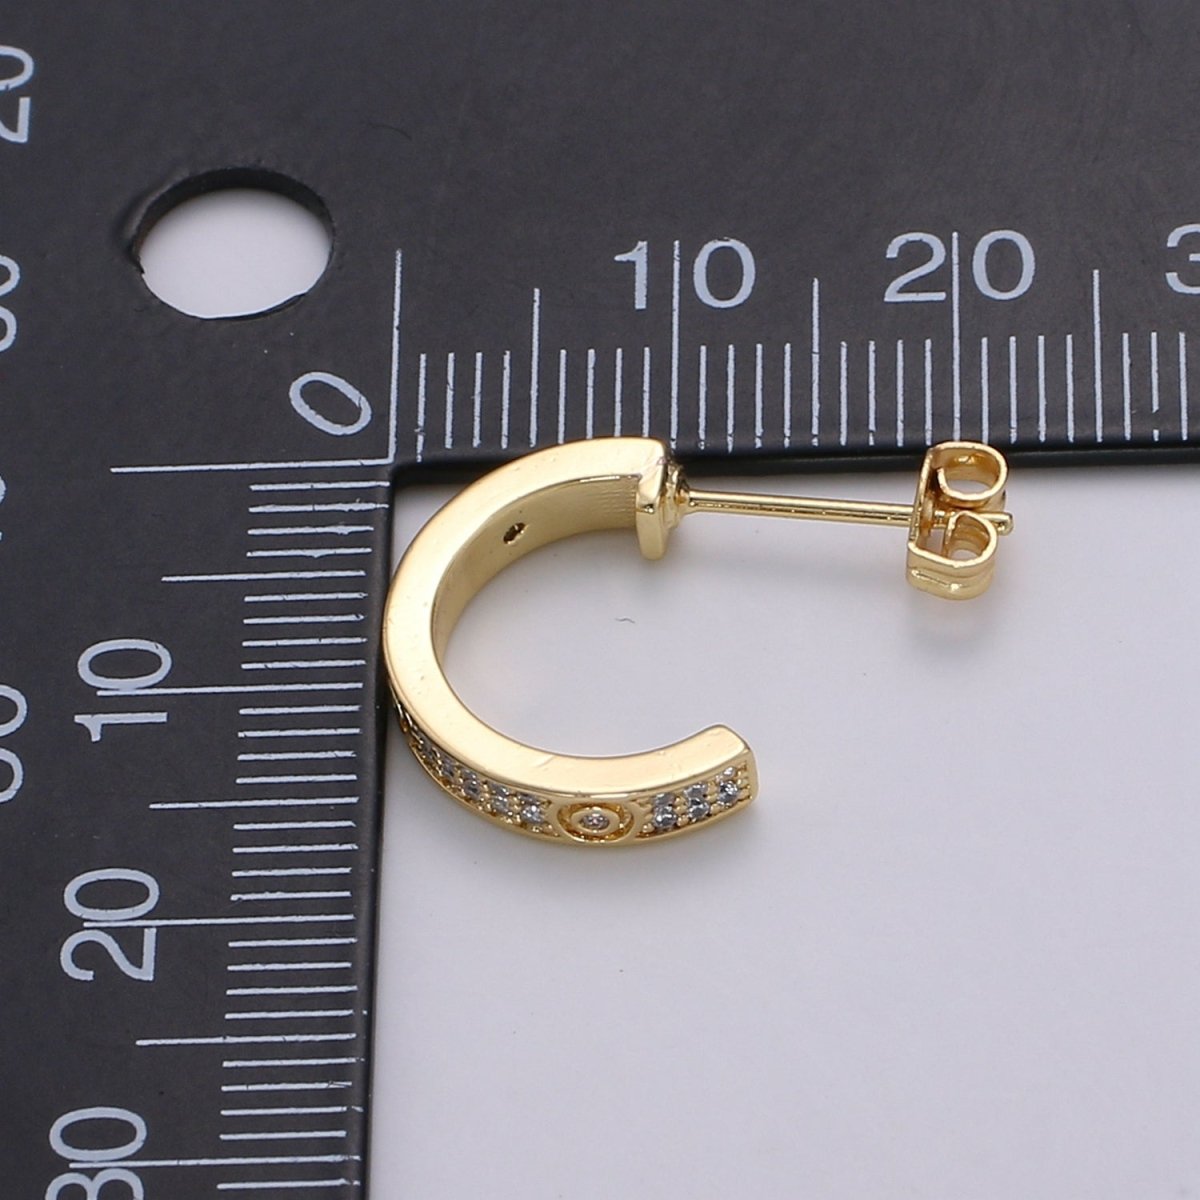 24K Gold filled Pave CZ Stud Earring, White Gold filled Micro Pave Earring for DIY Earring Craft Supply Jewelry Making Q-387 Q-388 - DLUXCA